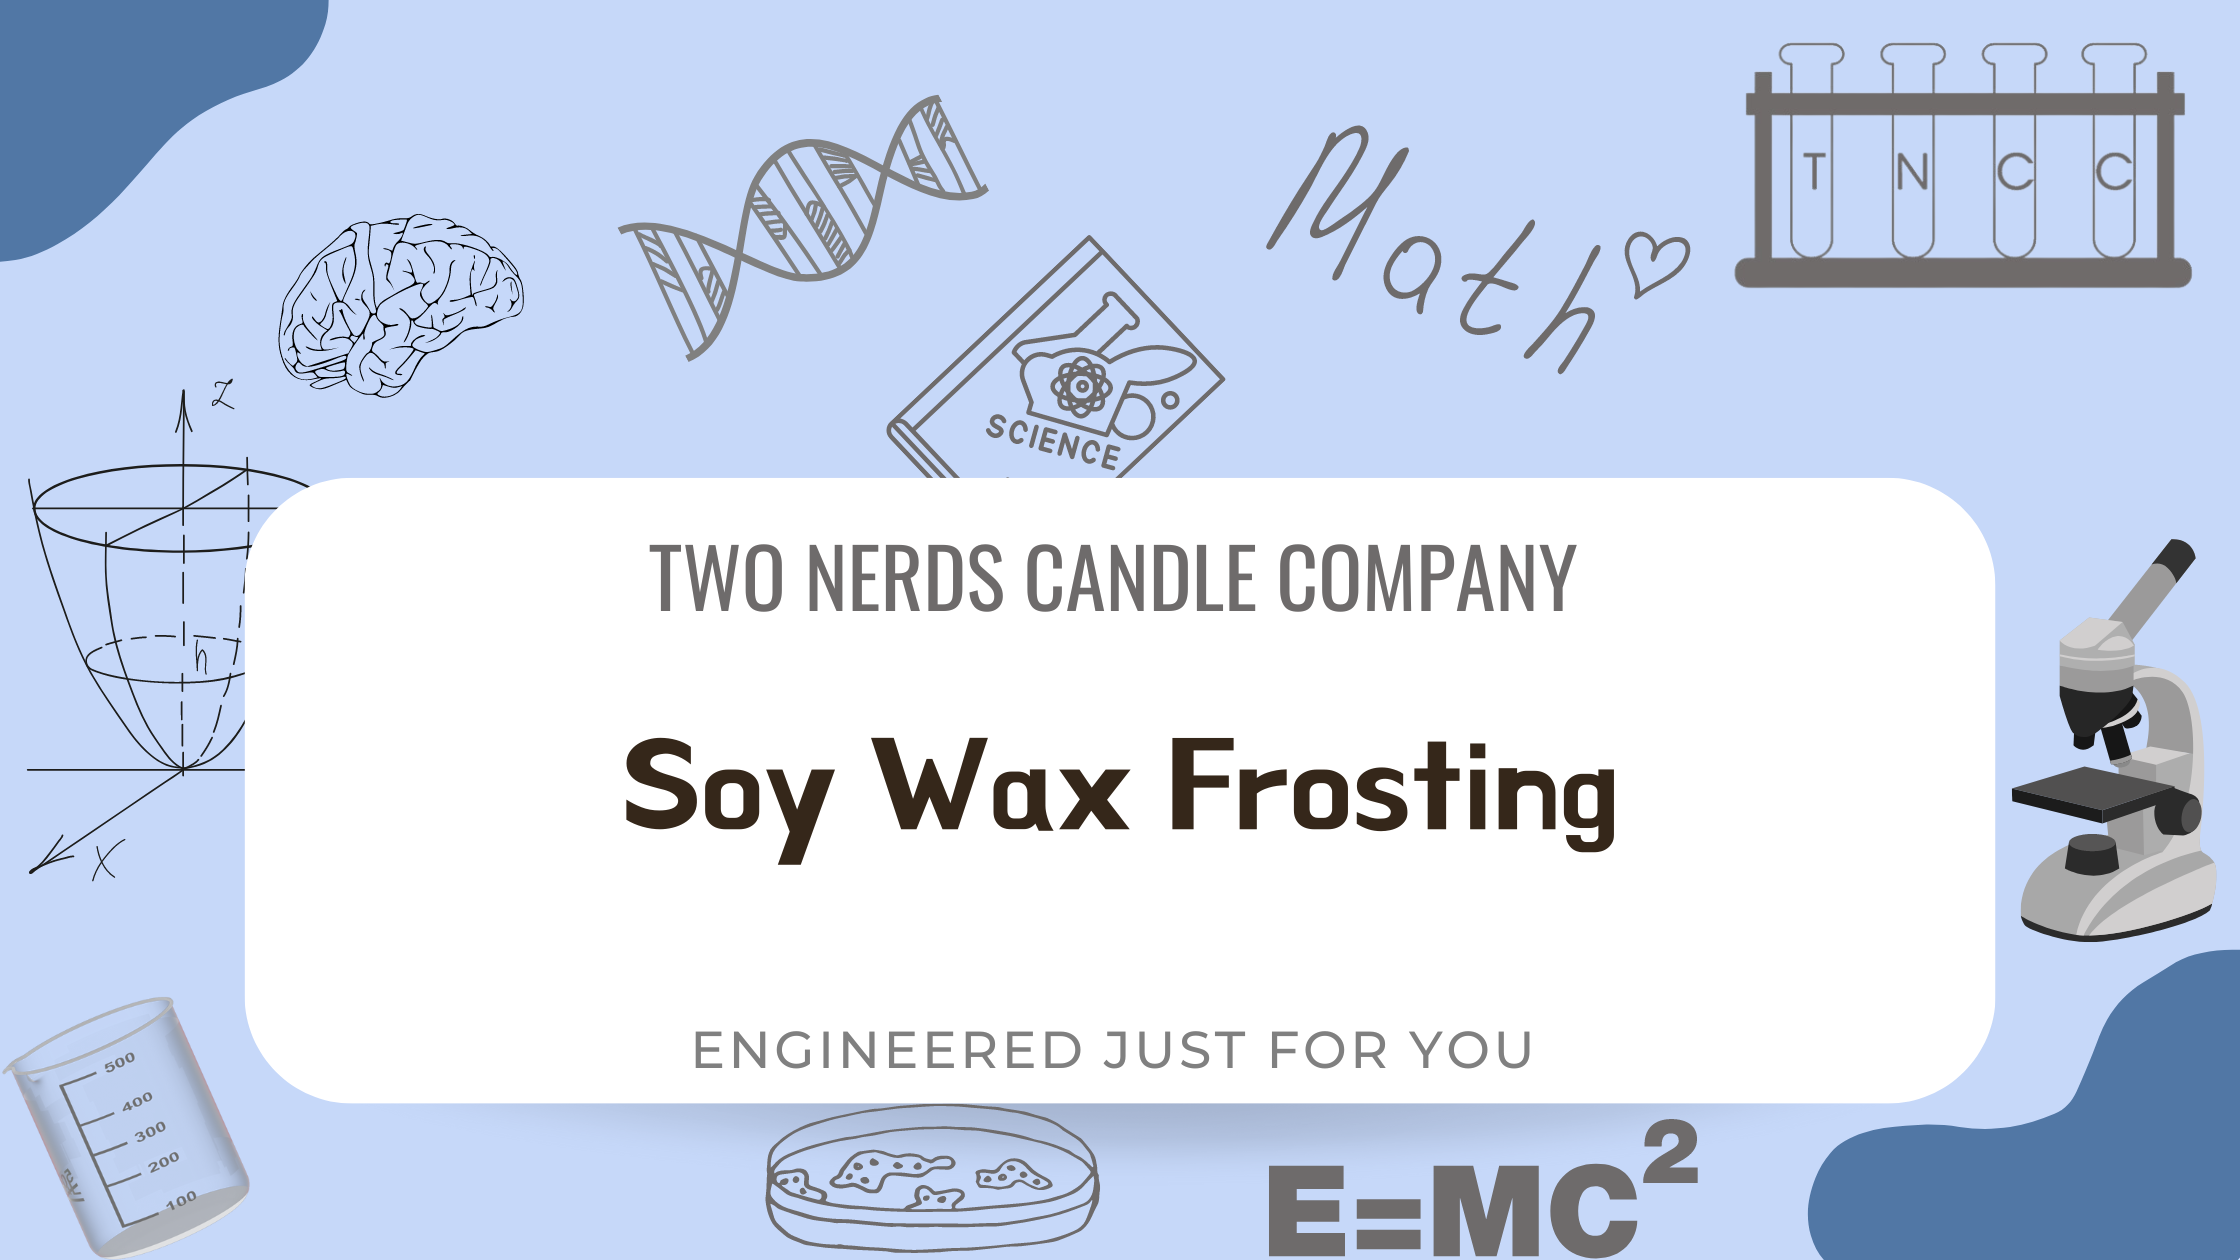 Soy Wax Frosting- Why does my candle have white crystals on the surface?